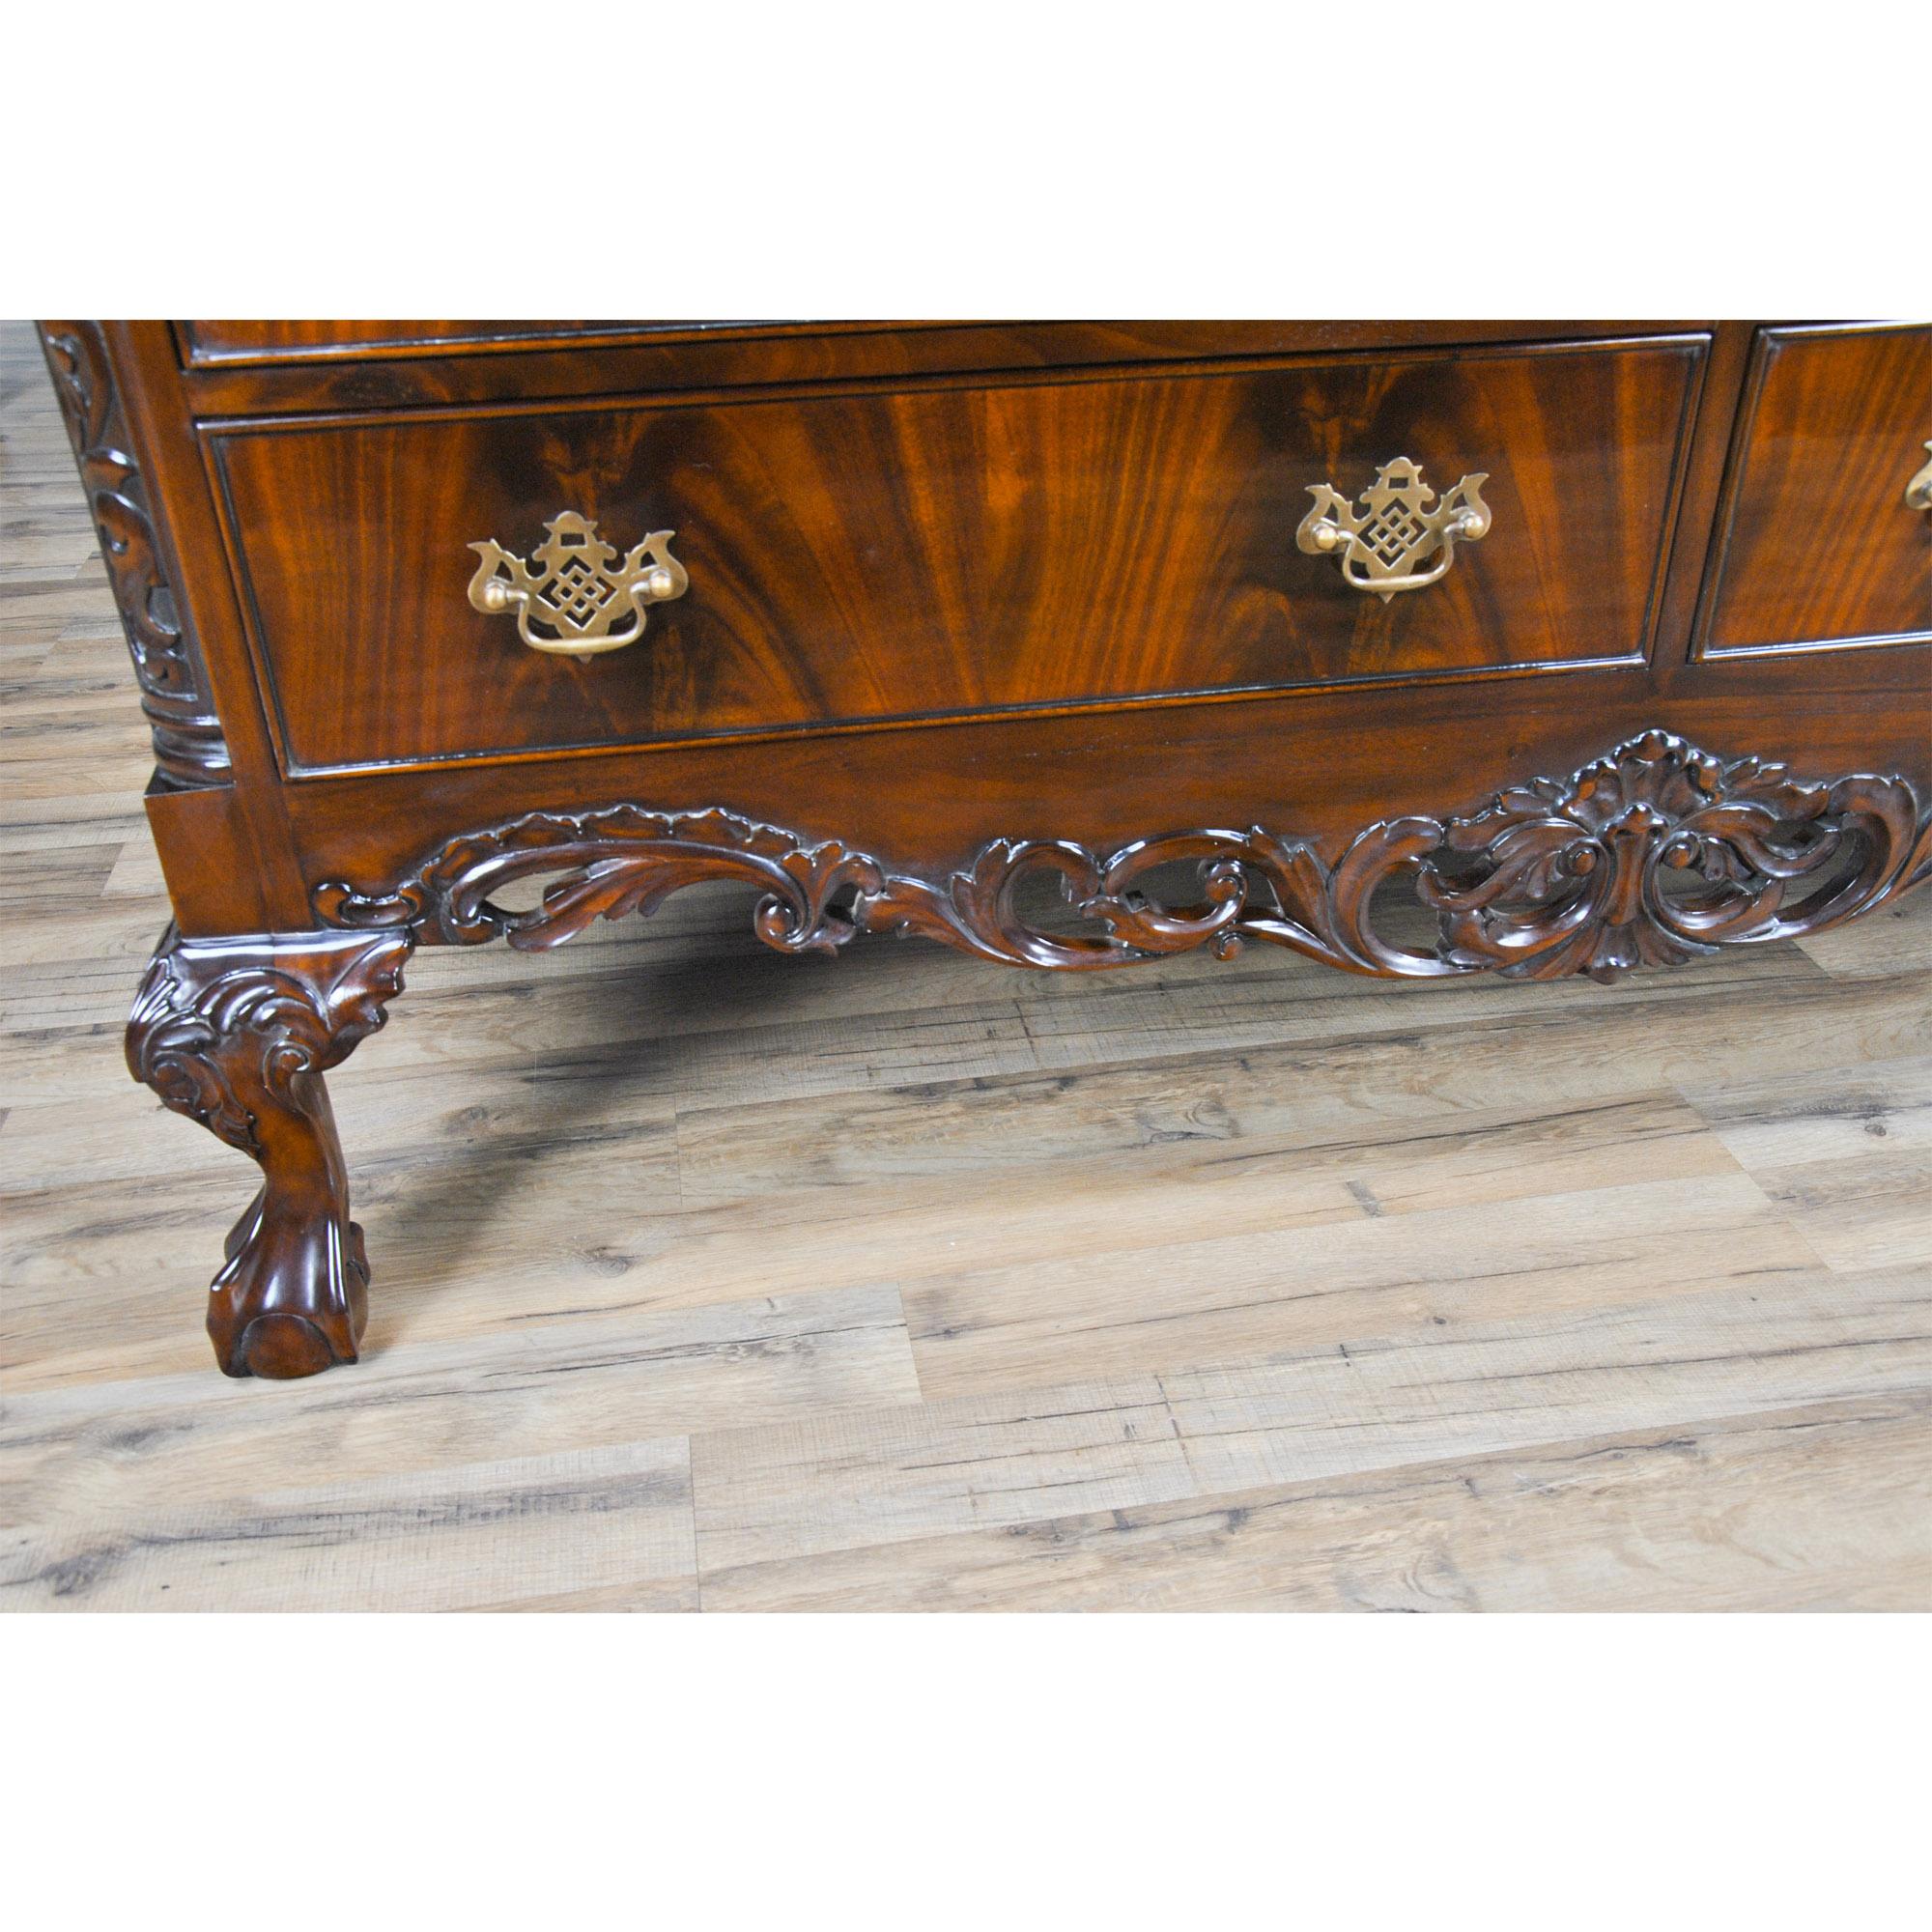 Chippendale Mahogany Triple Dresser In New Condition For Sale In Annville, PA